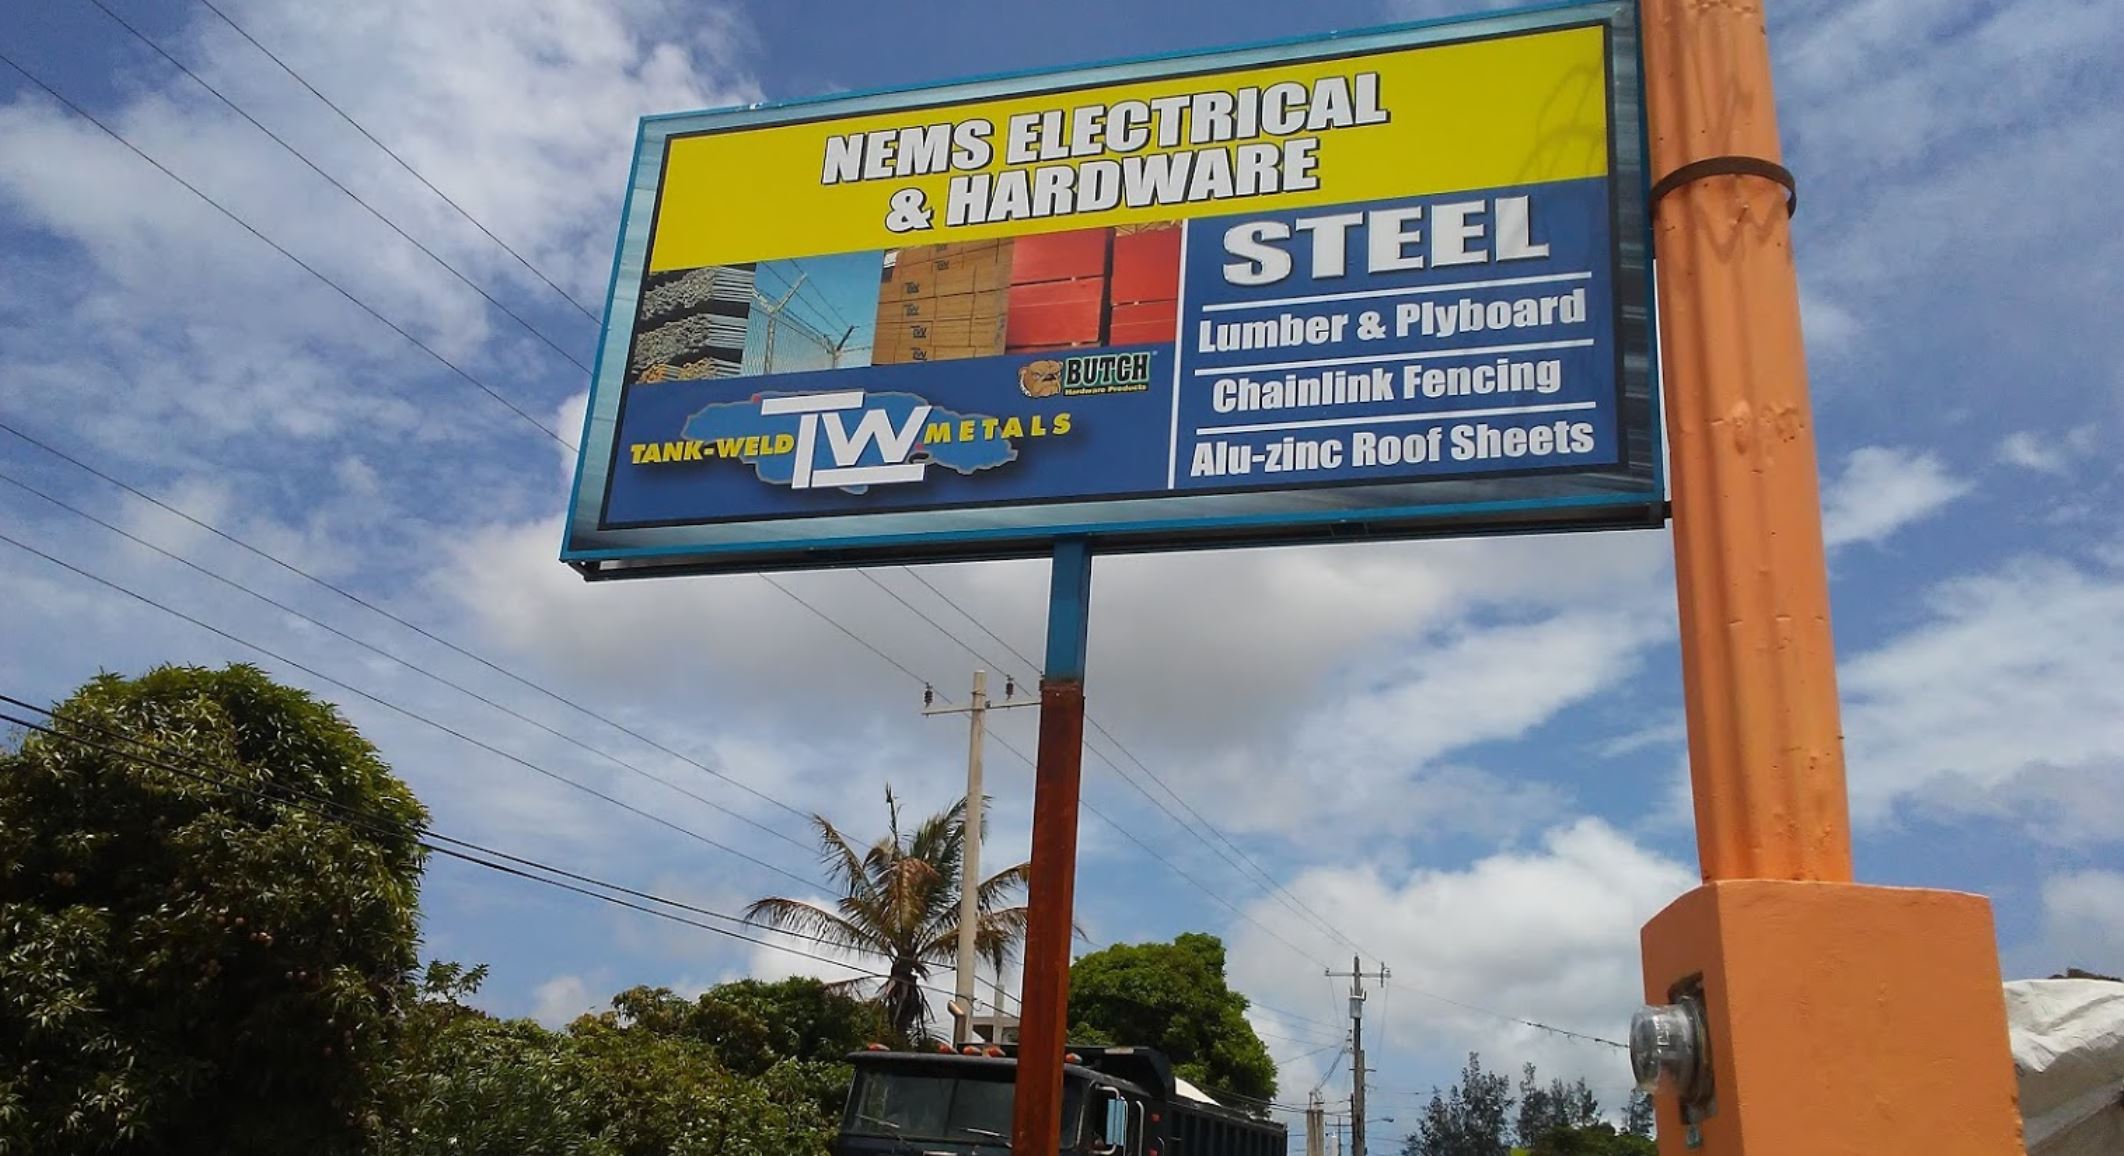 Nems Electrical and Hardware